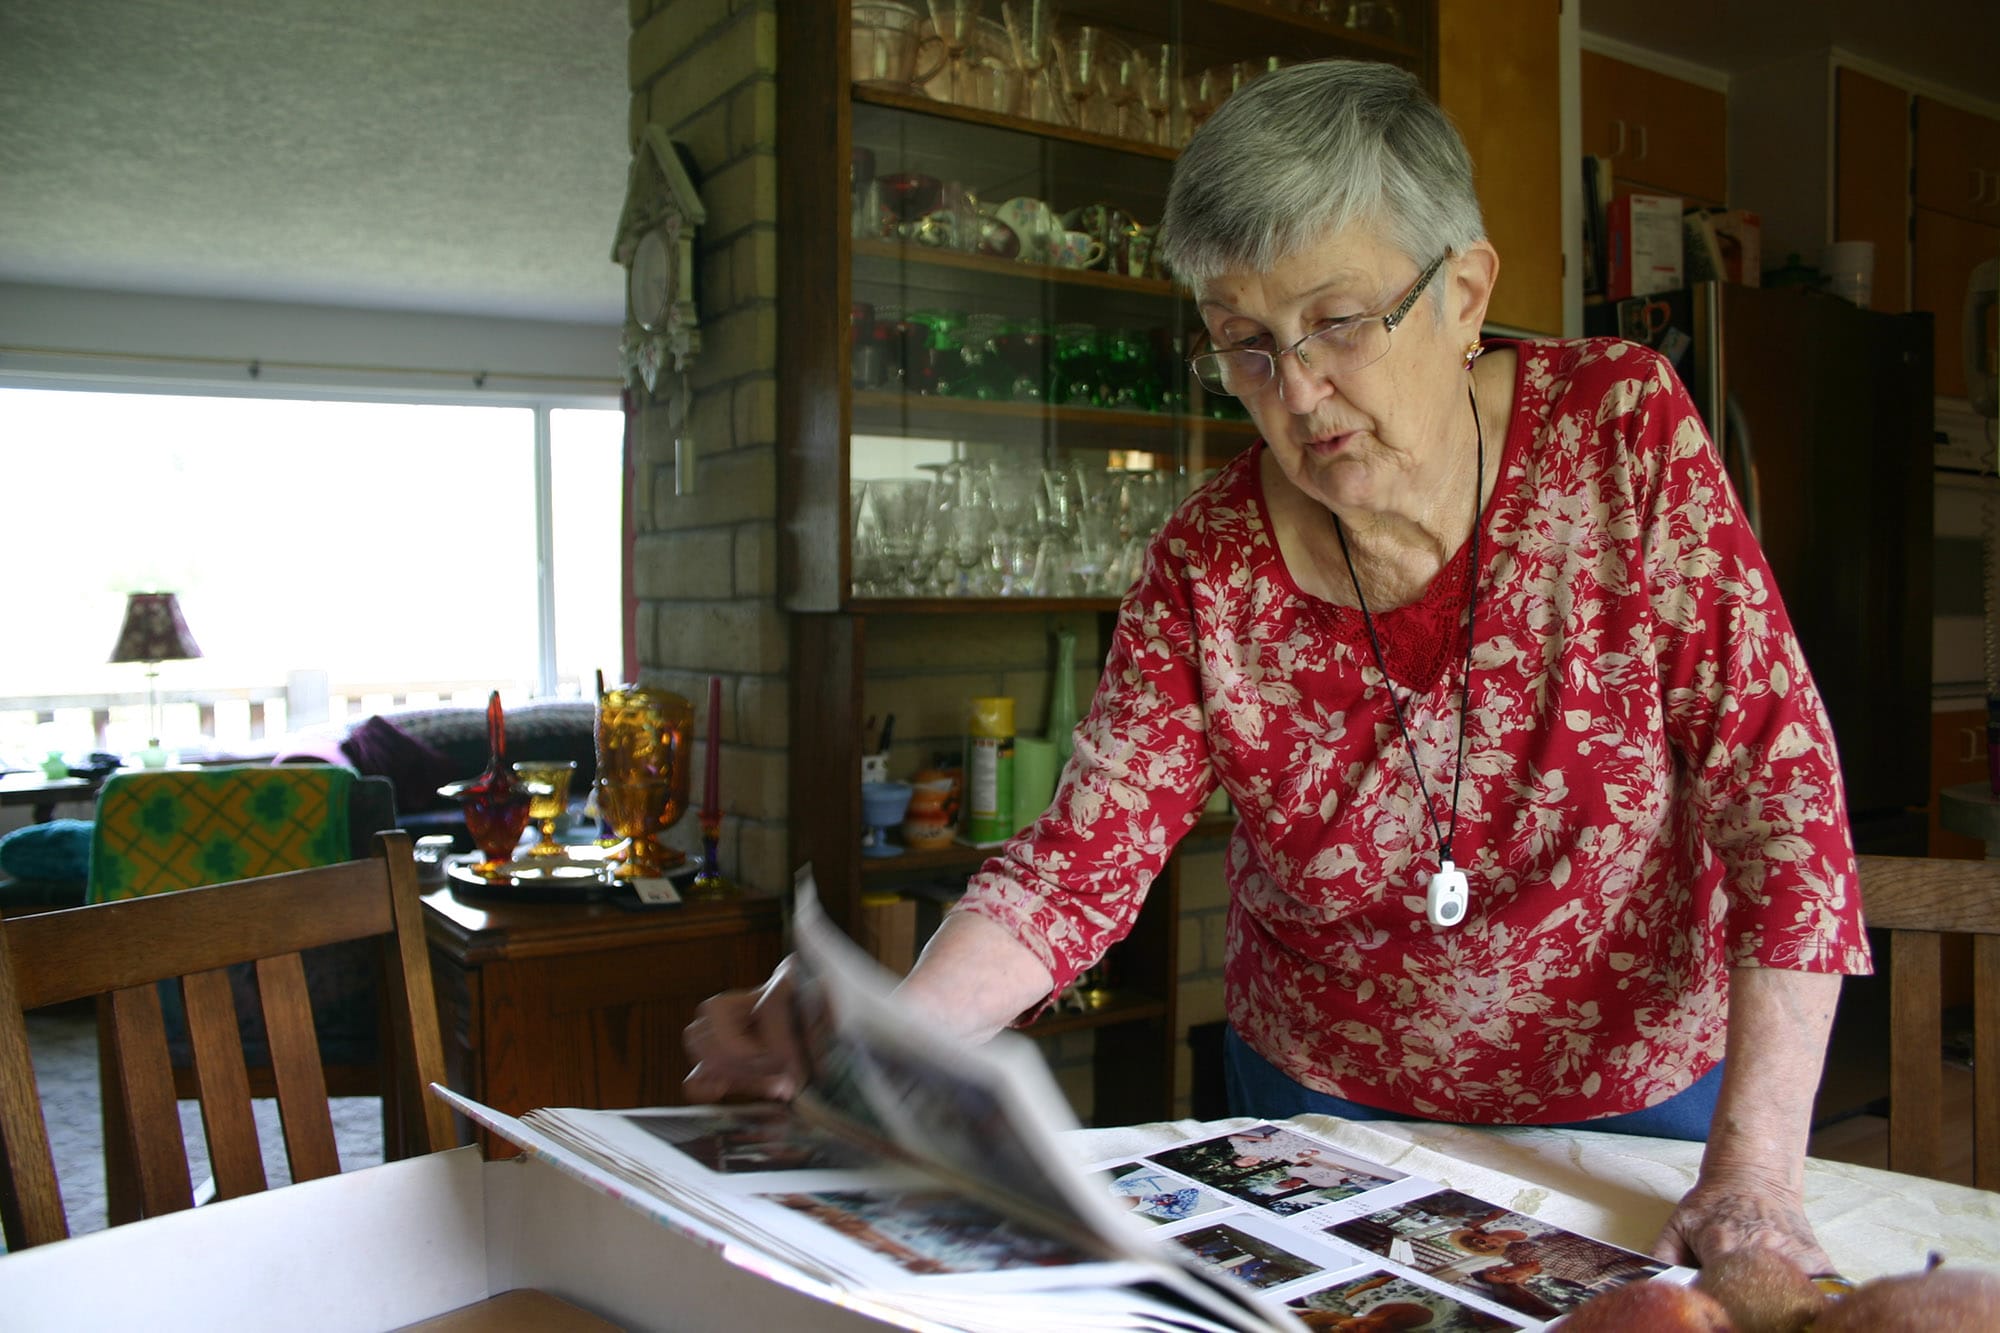 Wanda Turner flips through photos of friends, classmates and teachers at her potlucks over the years.